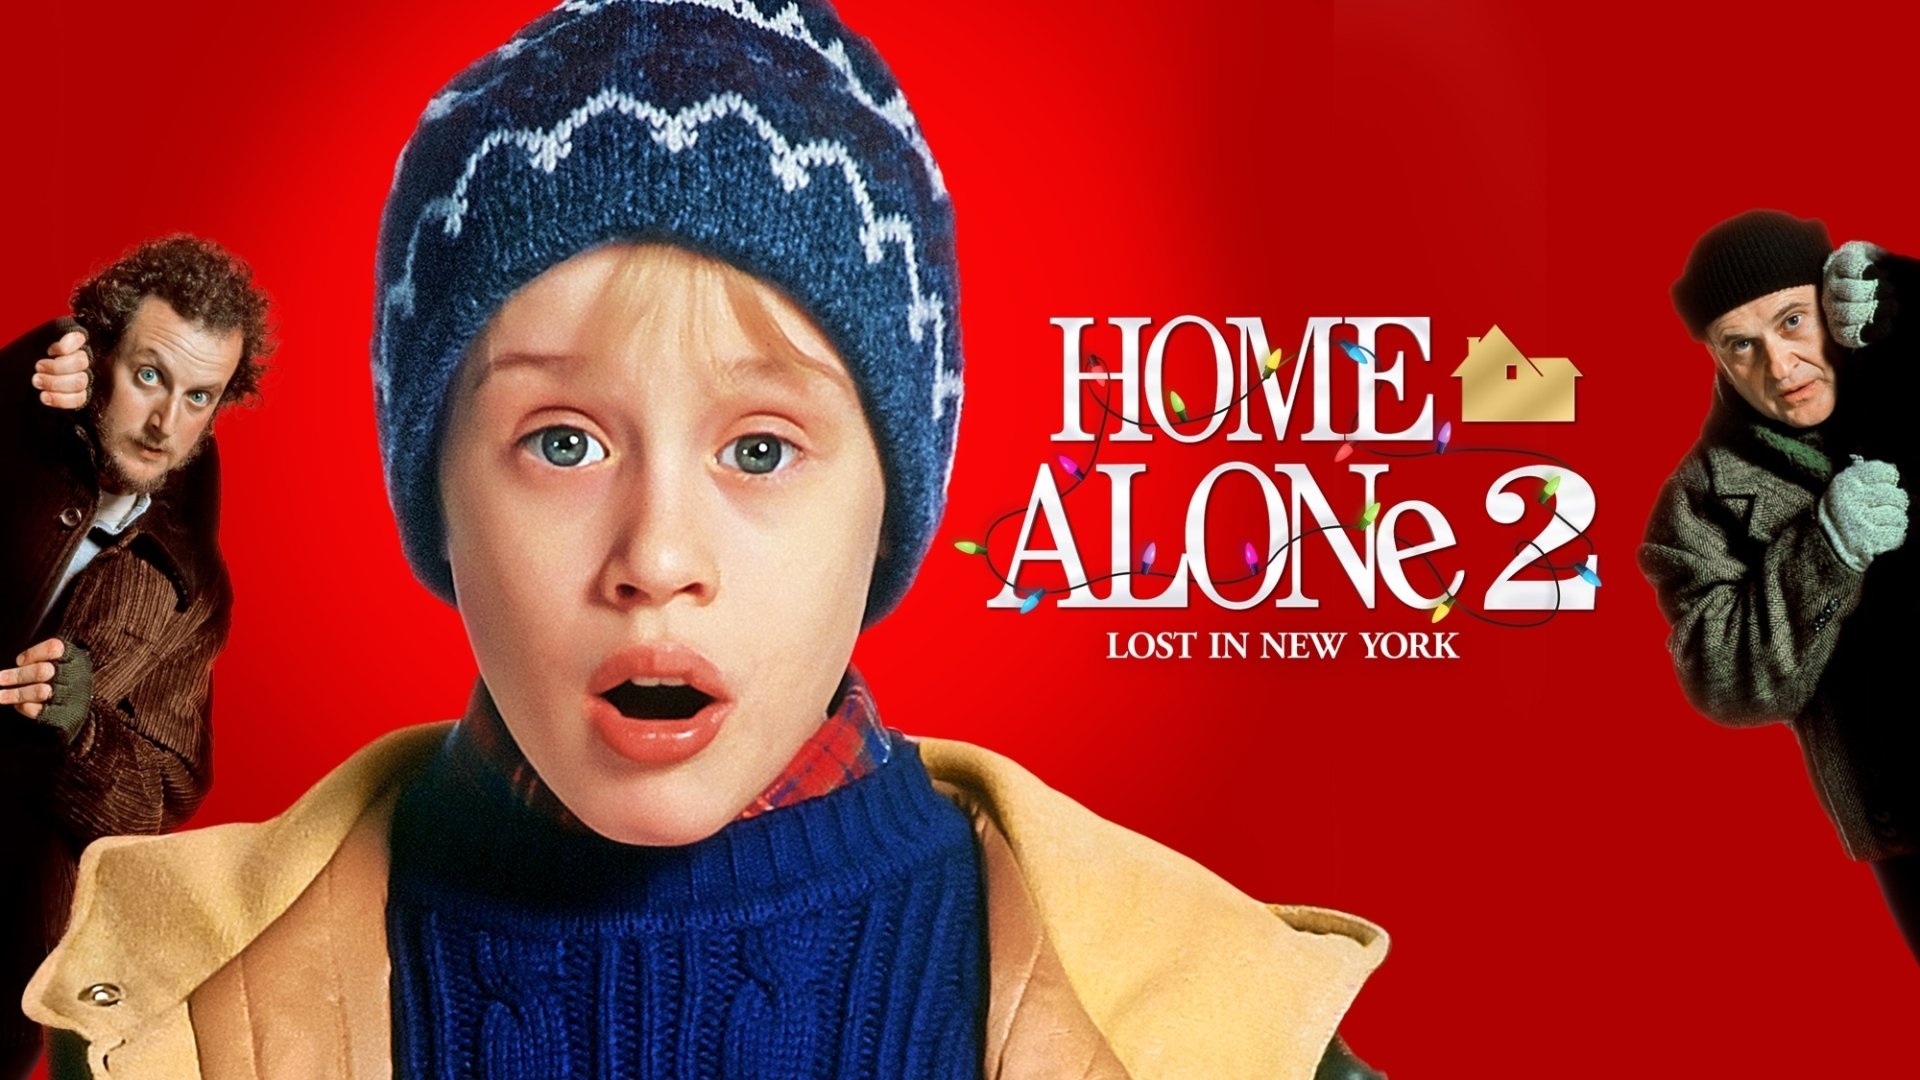 Kevin McCallister, HD Wallpapers, Background, Images, 1920x1080 Full HD Desktop